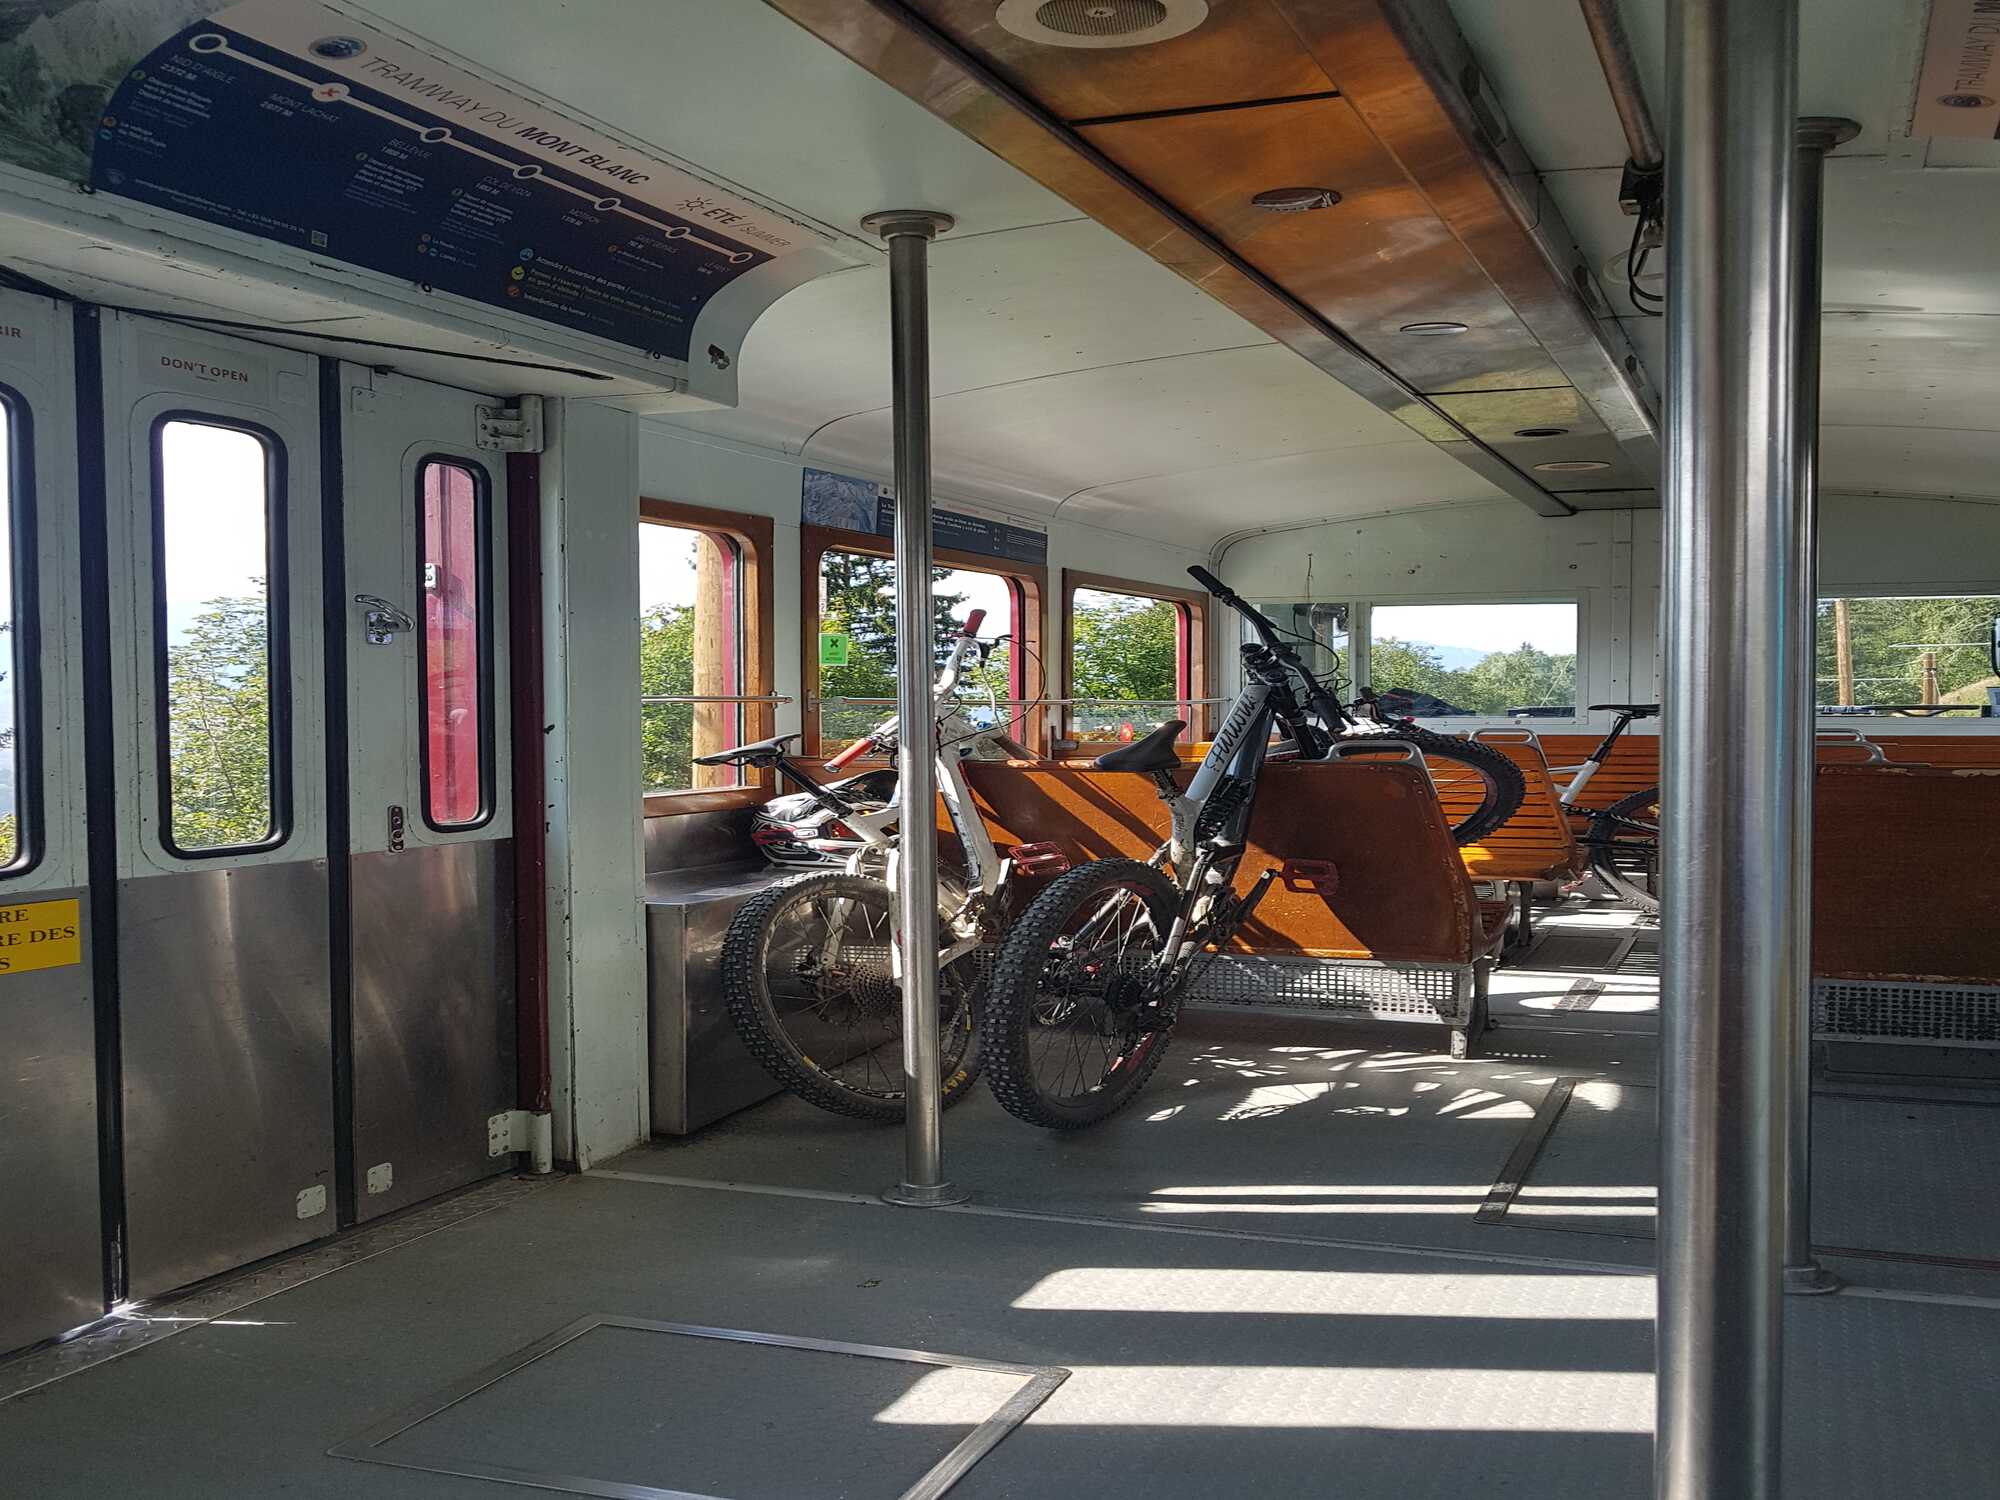 image of inside a train showing bikes